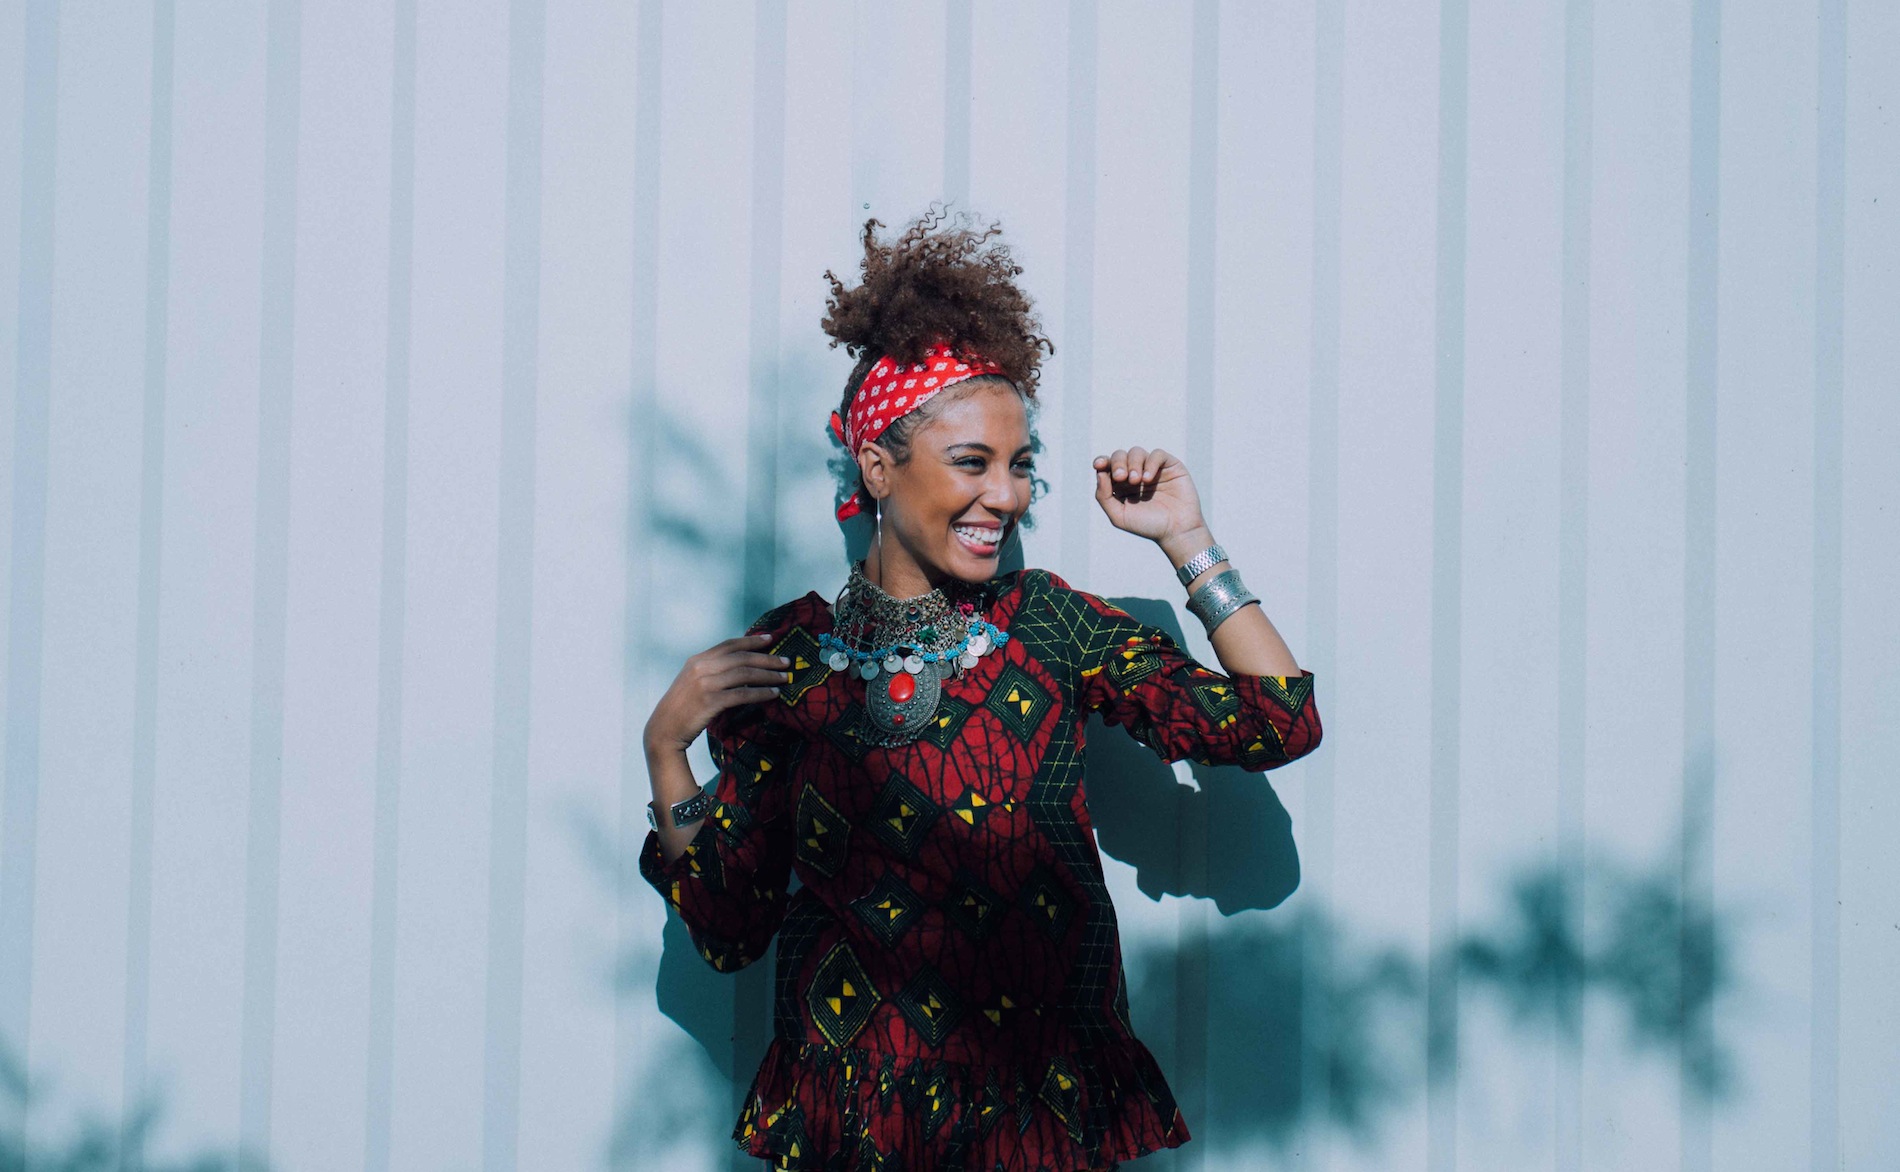 Meet Amna Elshandaweely, The Young Egyptian Designer Creating a Pan-African Fashion Identity